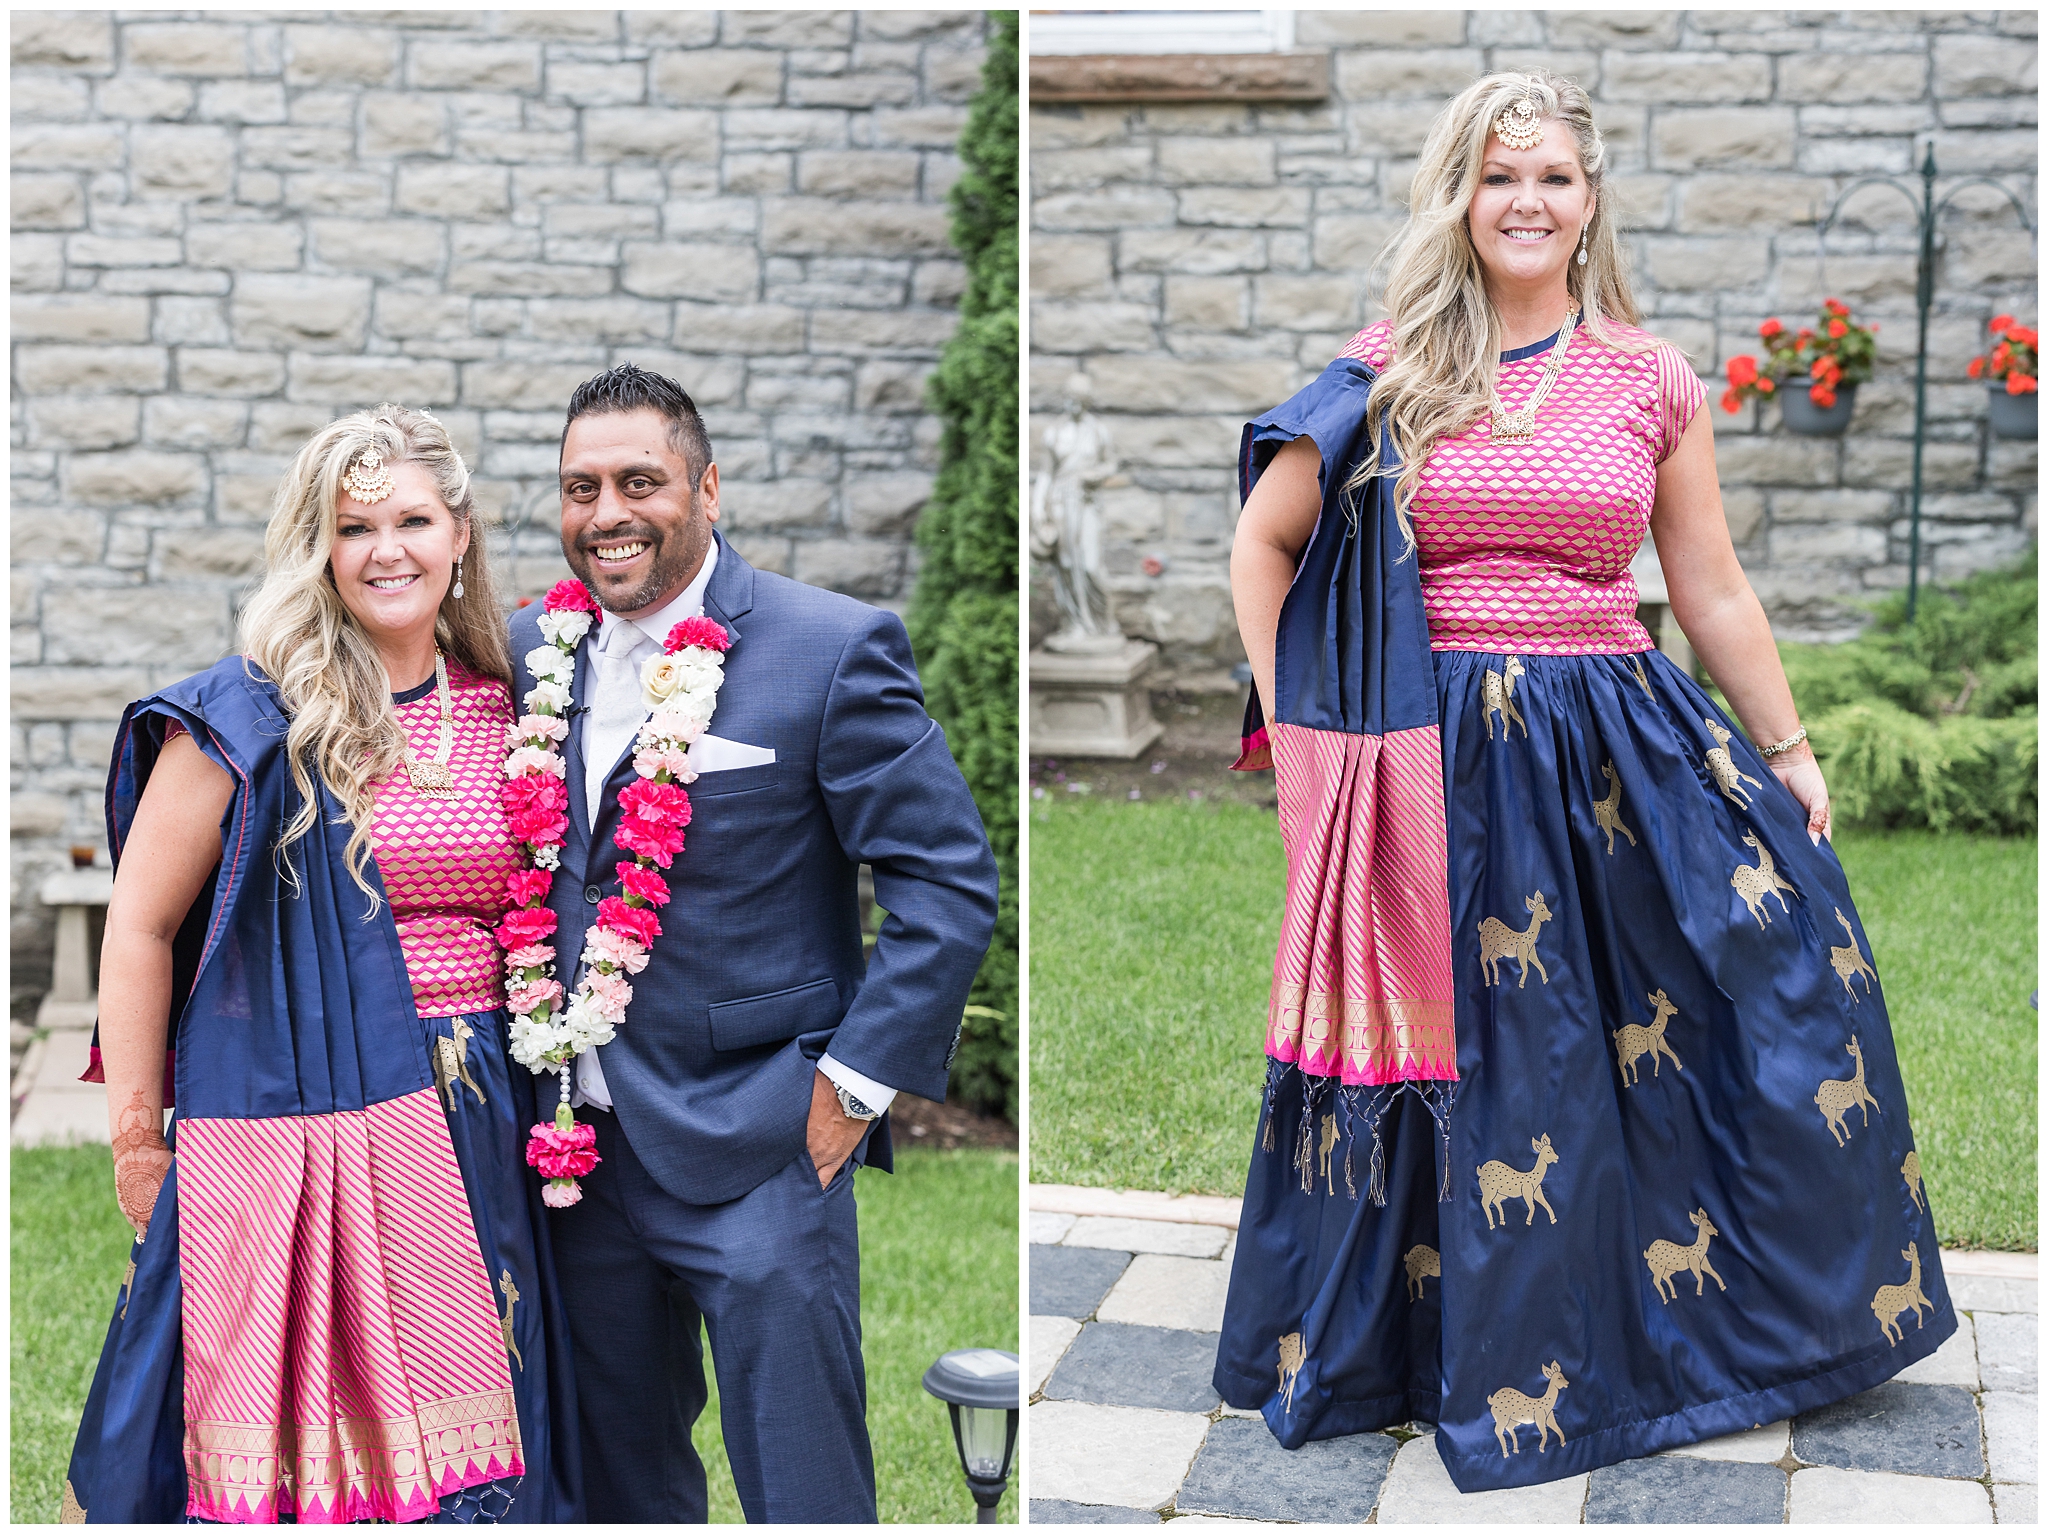 Colourful multicultural wedding 0049